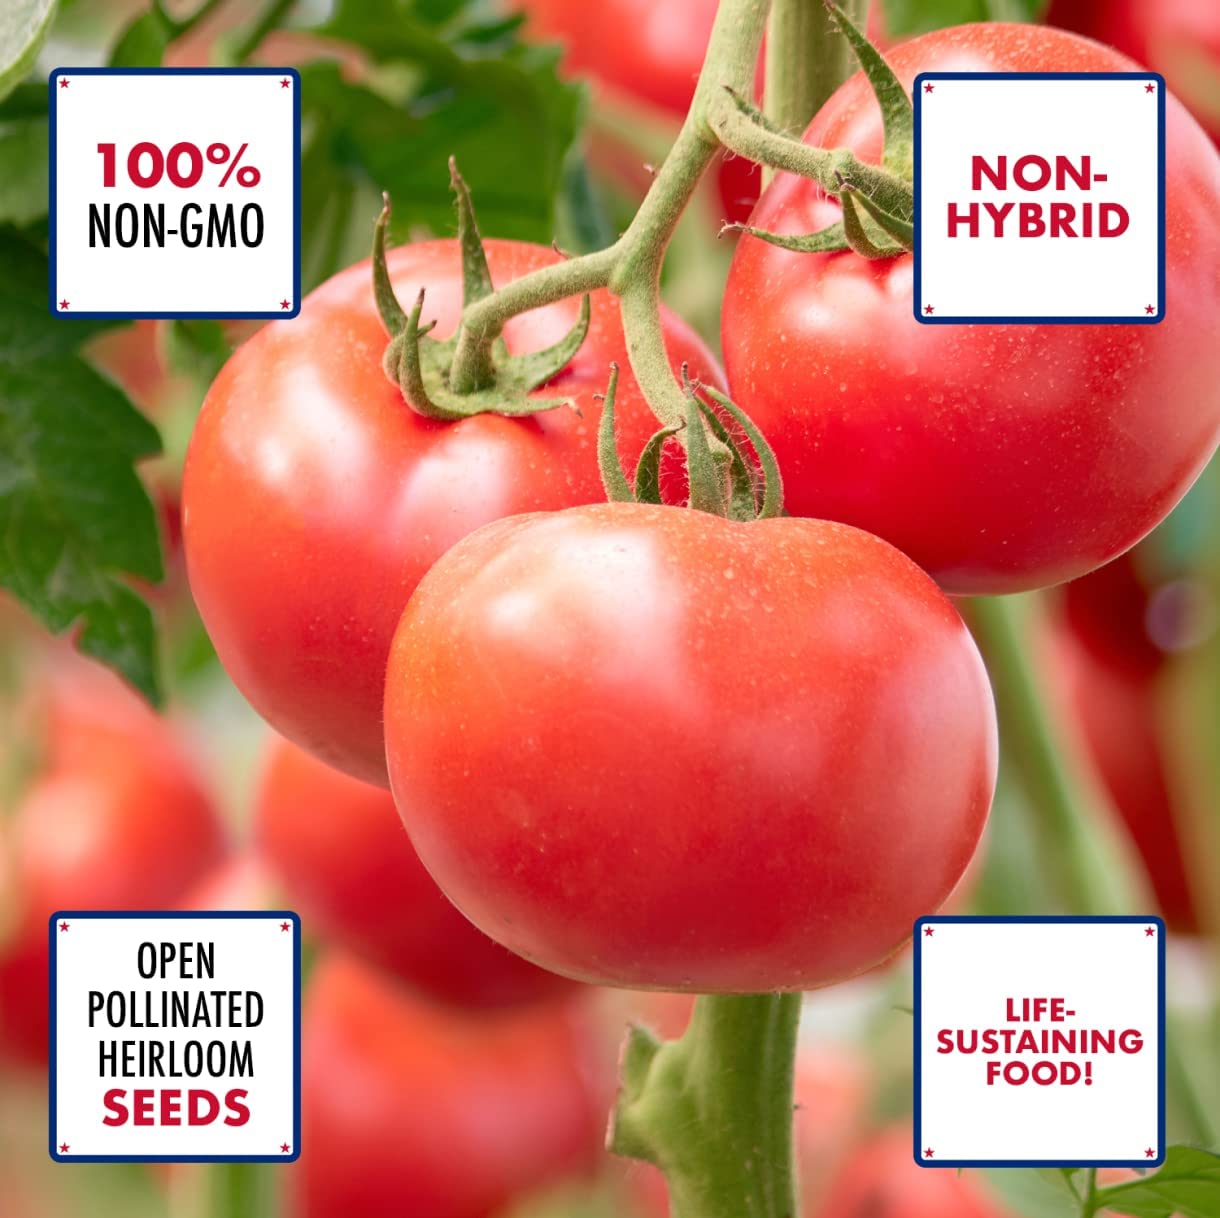 Close-up image of a vibrant tomato with text overlay emphasizing its qualities: non-hybrid, 1000% non-GMO, open-pollinated, and described as a life-sustaining food source, highlighting its purity, naturalness, and nutritional value.